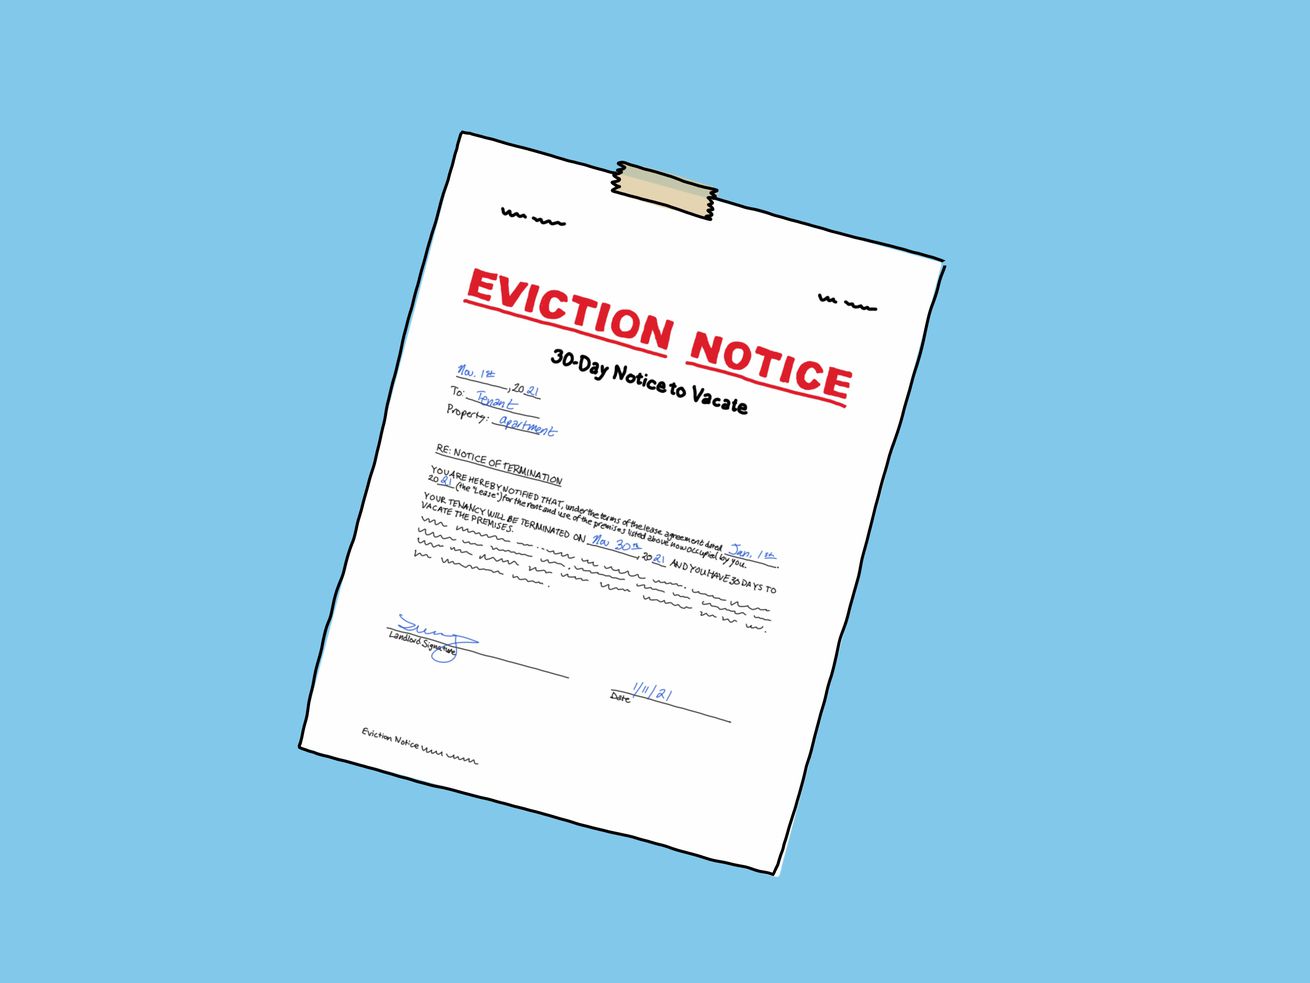 The best $15,490.53 I ever spent: Getting evicted